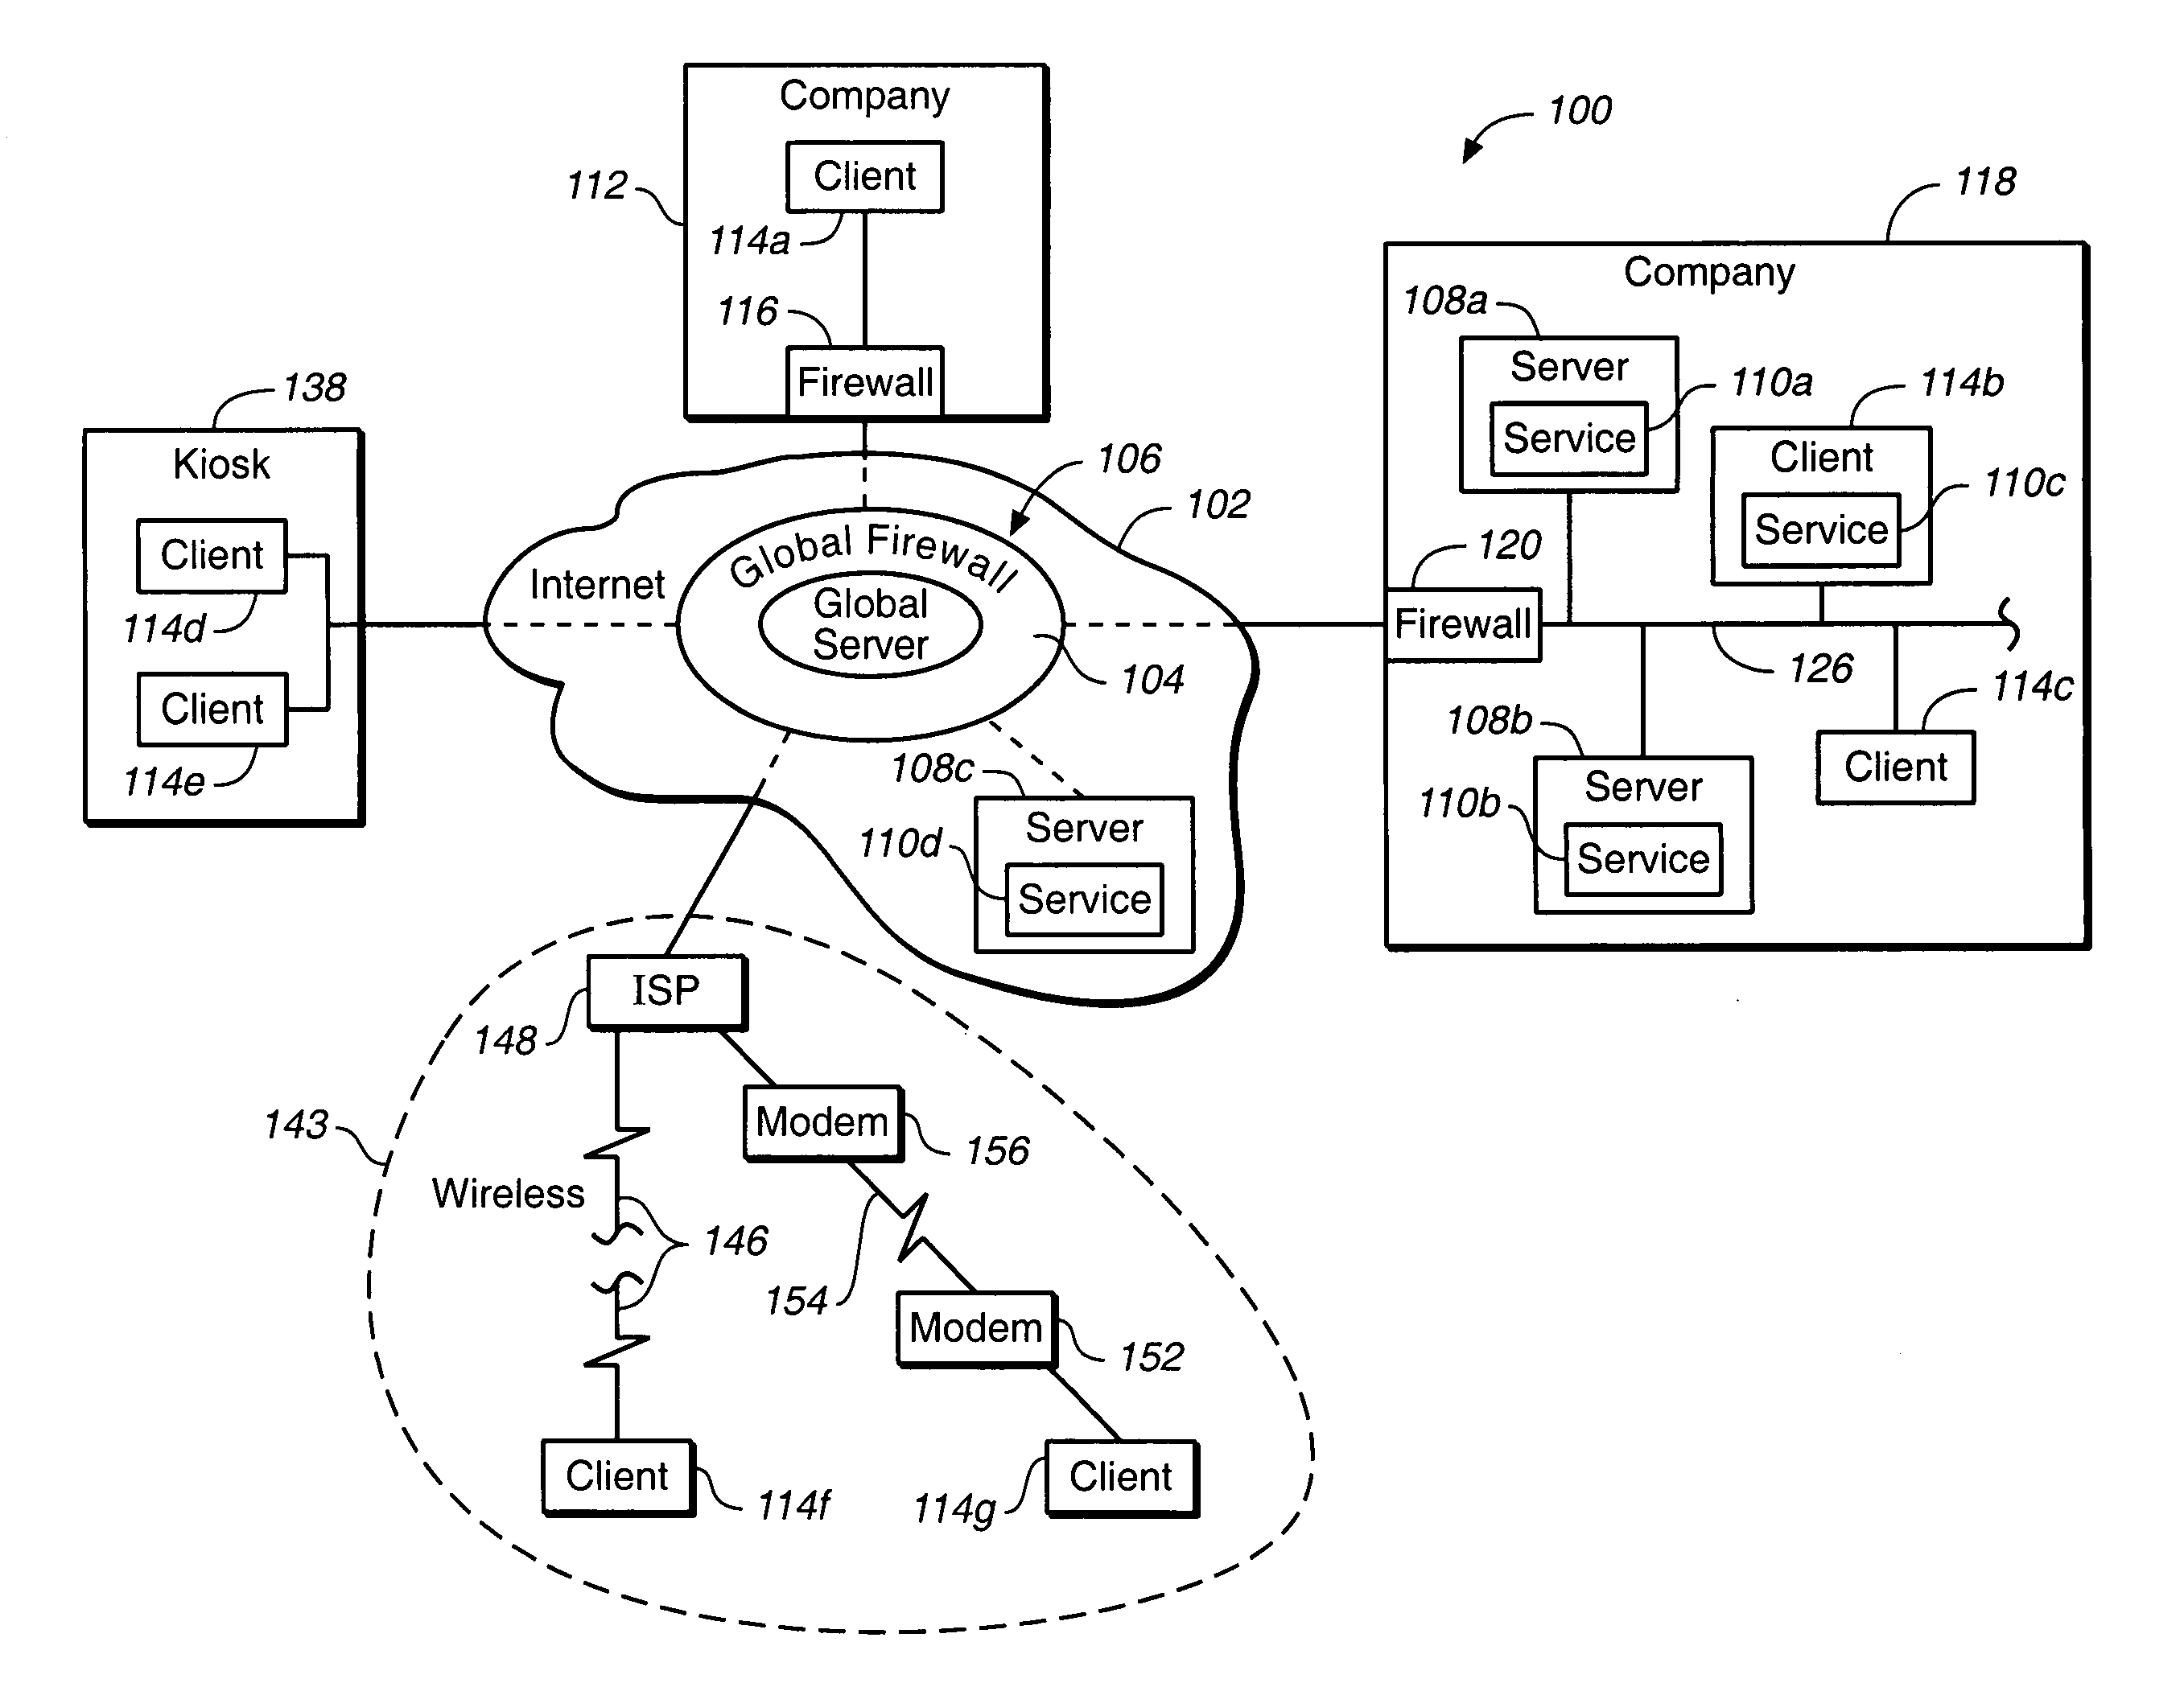 System and method for enabling secure access to services in a computer network